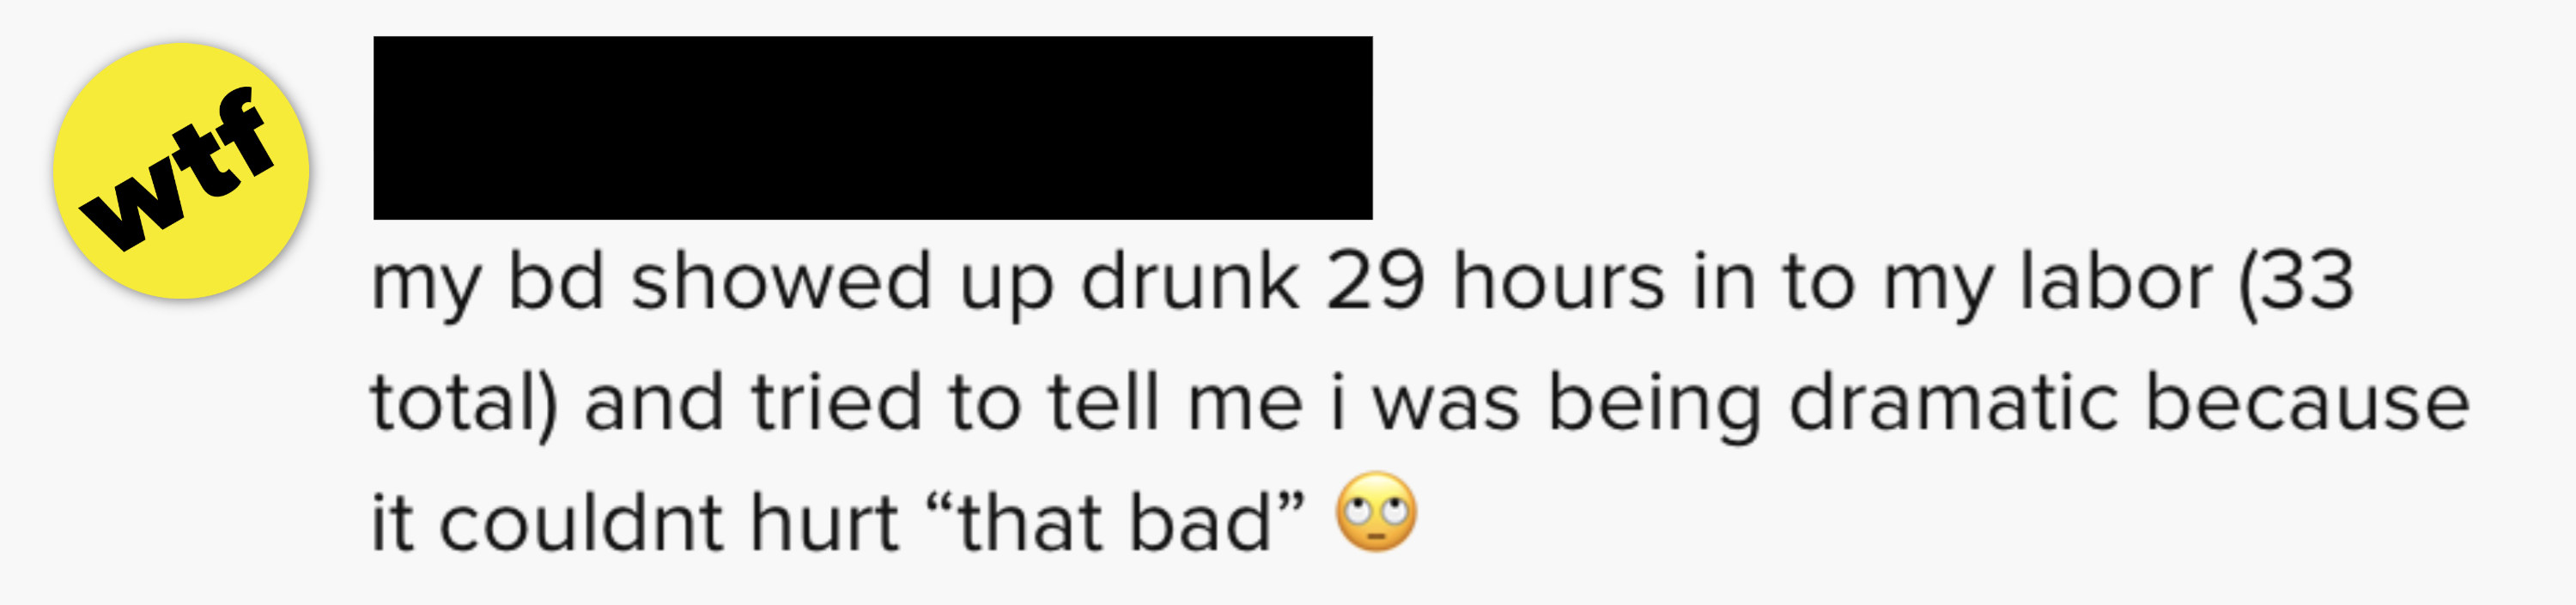 My baby daddy showed up drunk 29 hours into my labor (33 hours total) and tried to tell me I was being dramatic because it couldn&#x27;t hurt &#x27;that bad&#x27;&quot;